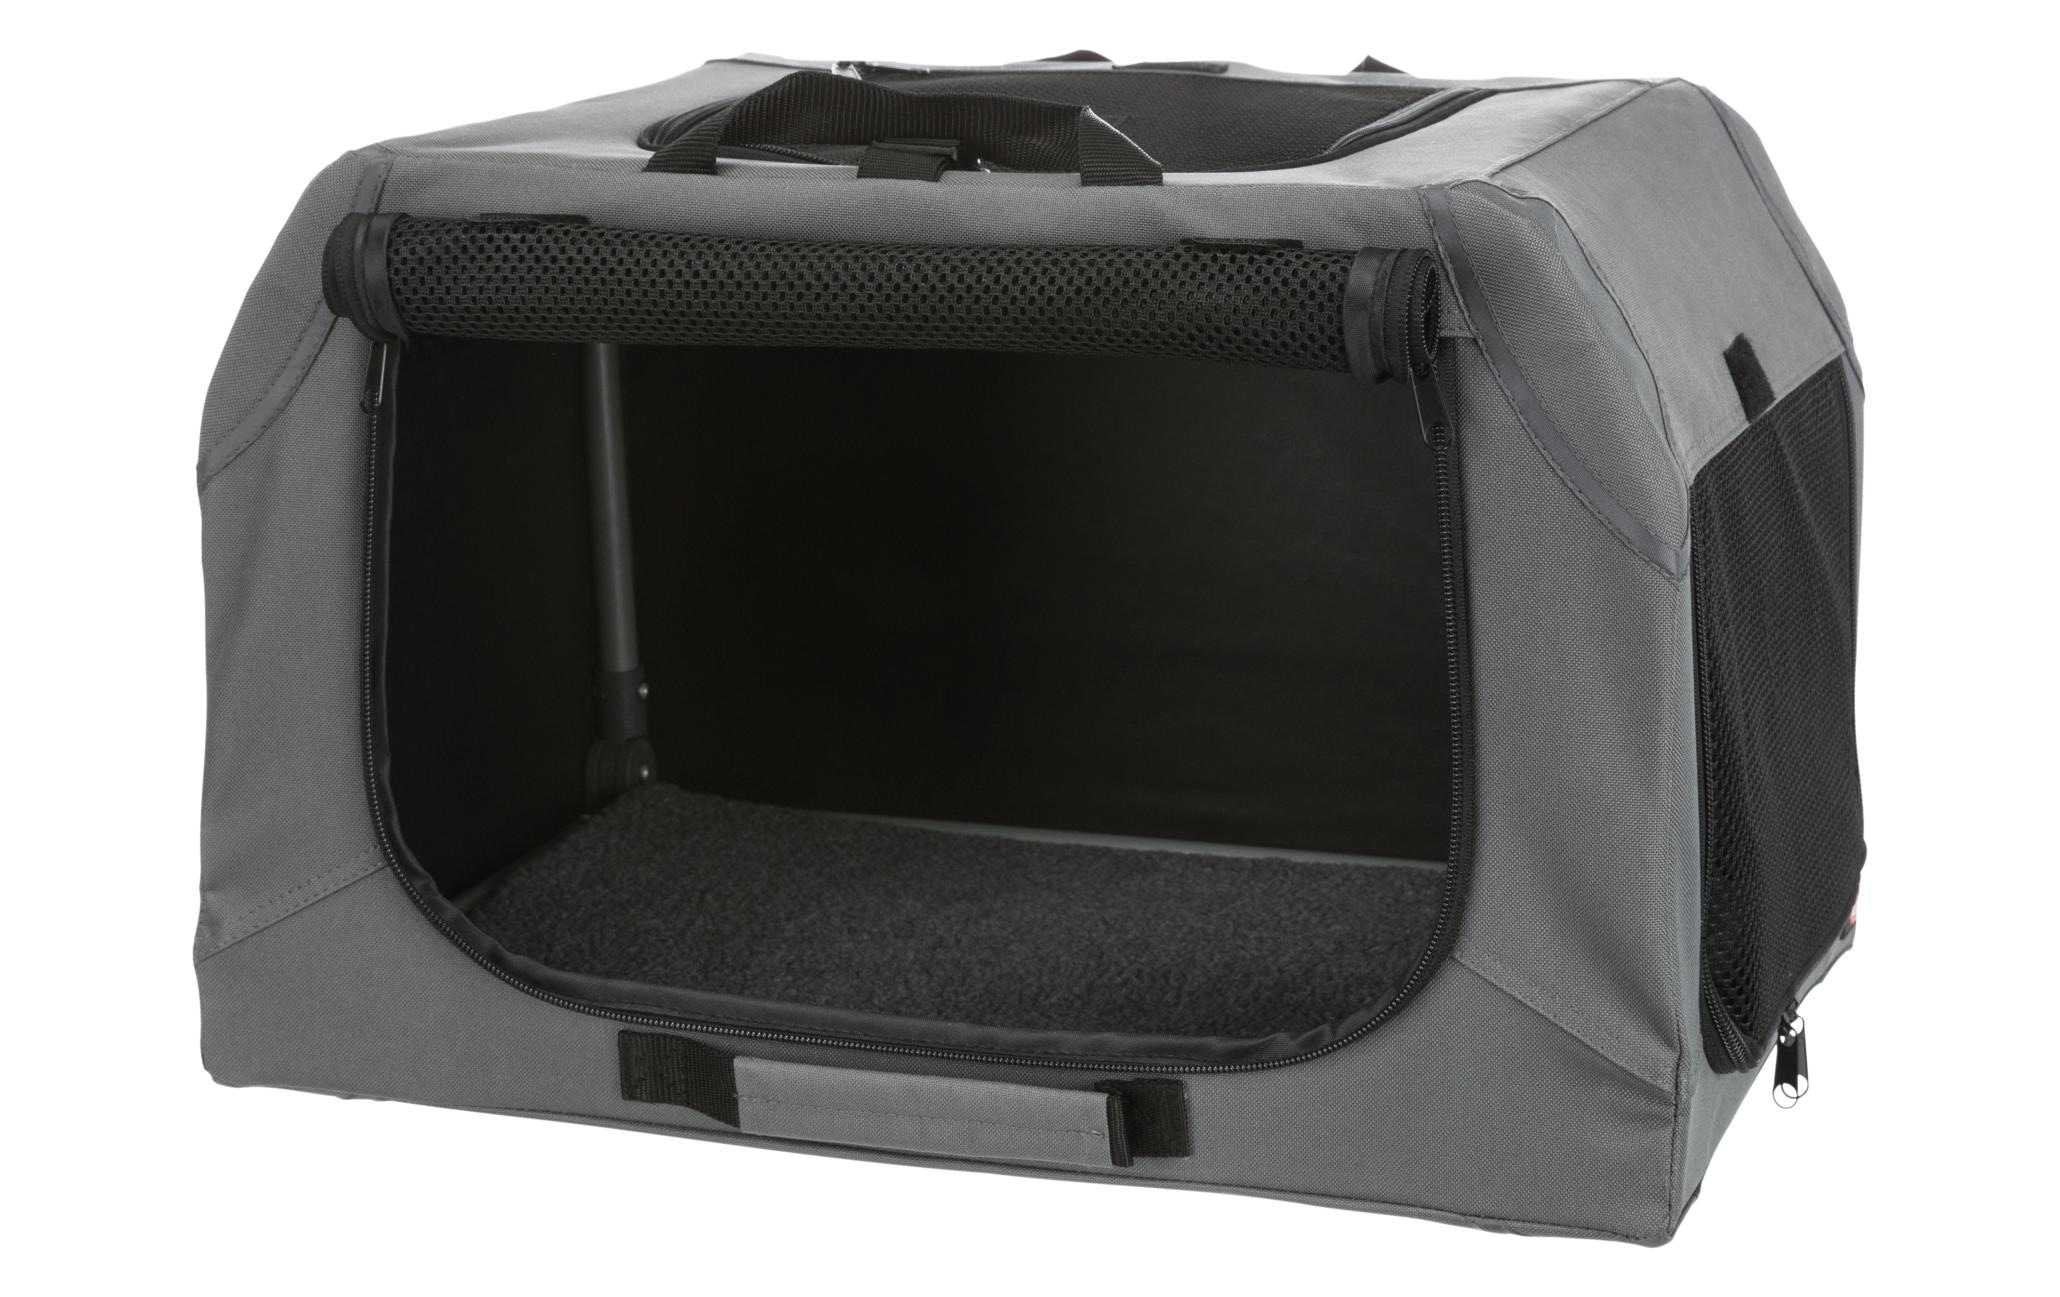 Tiertransportbox »Soft Kennel Easy, S-M«